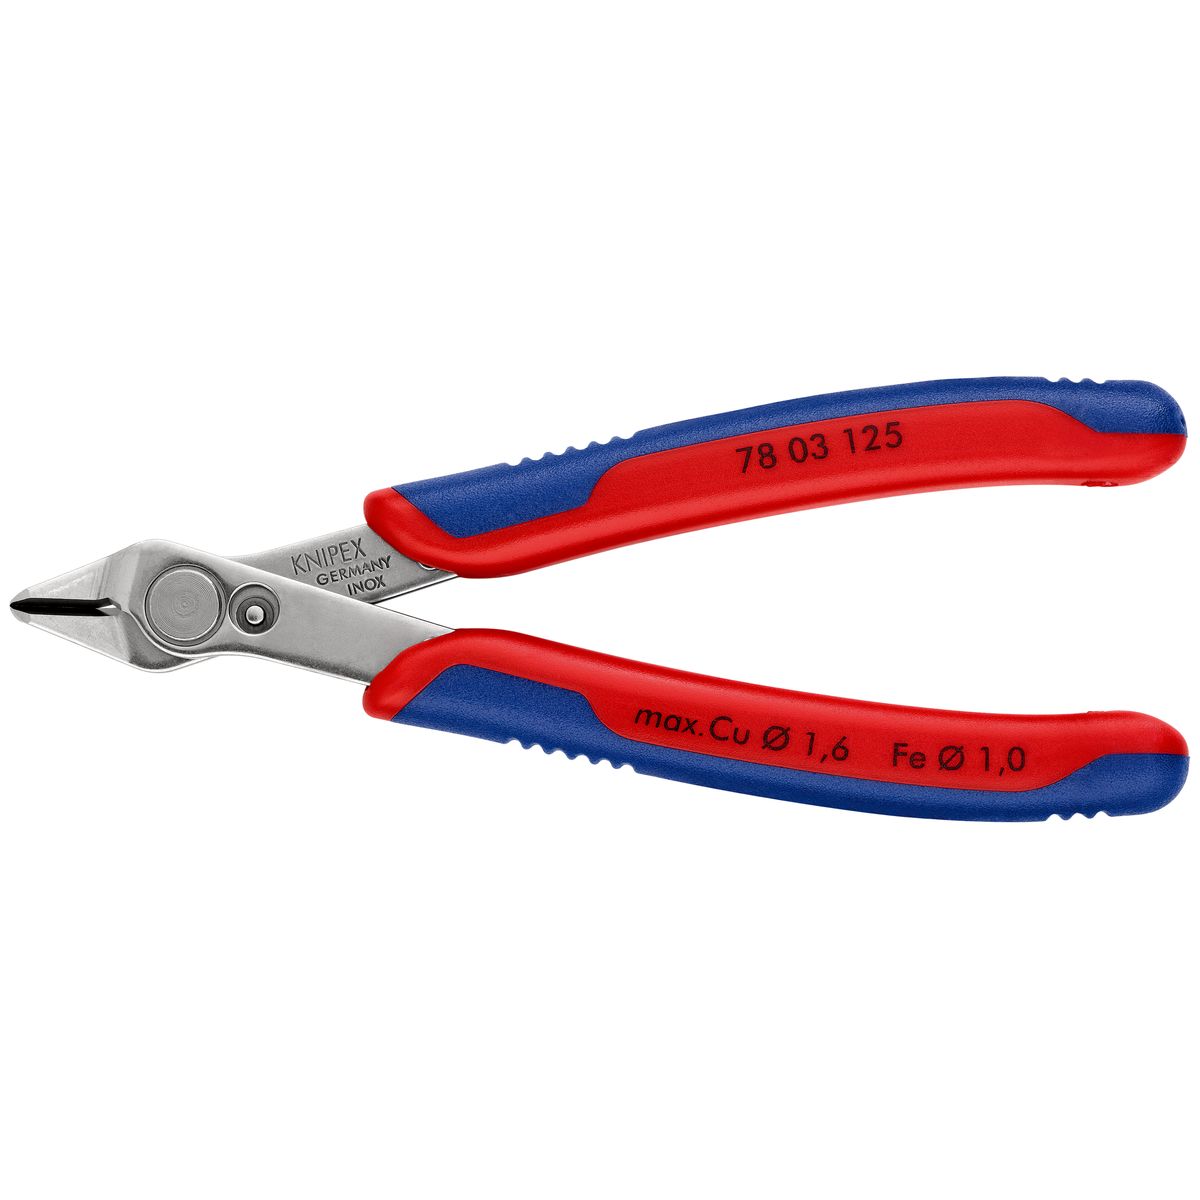 ELECTRONIC-SUPER-KNIPS 7803 125mm Knipex